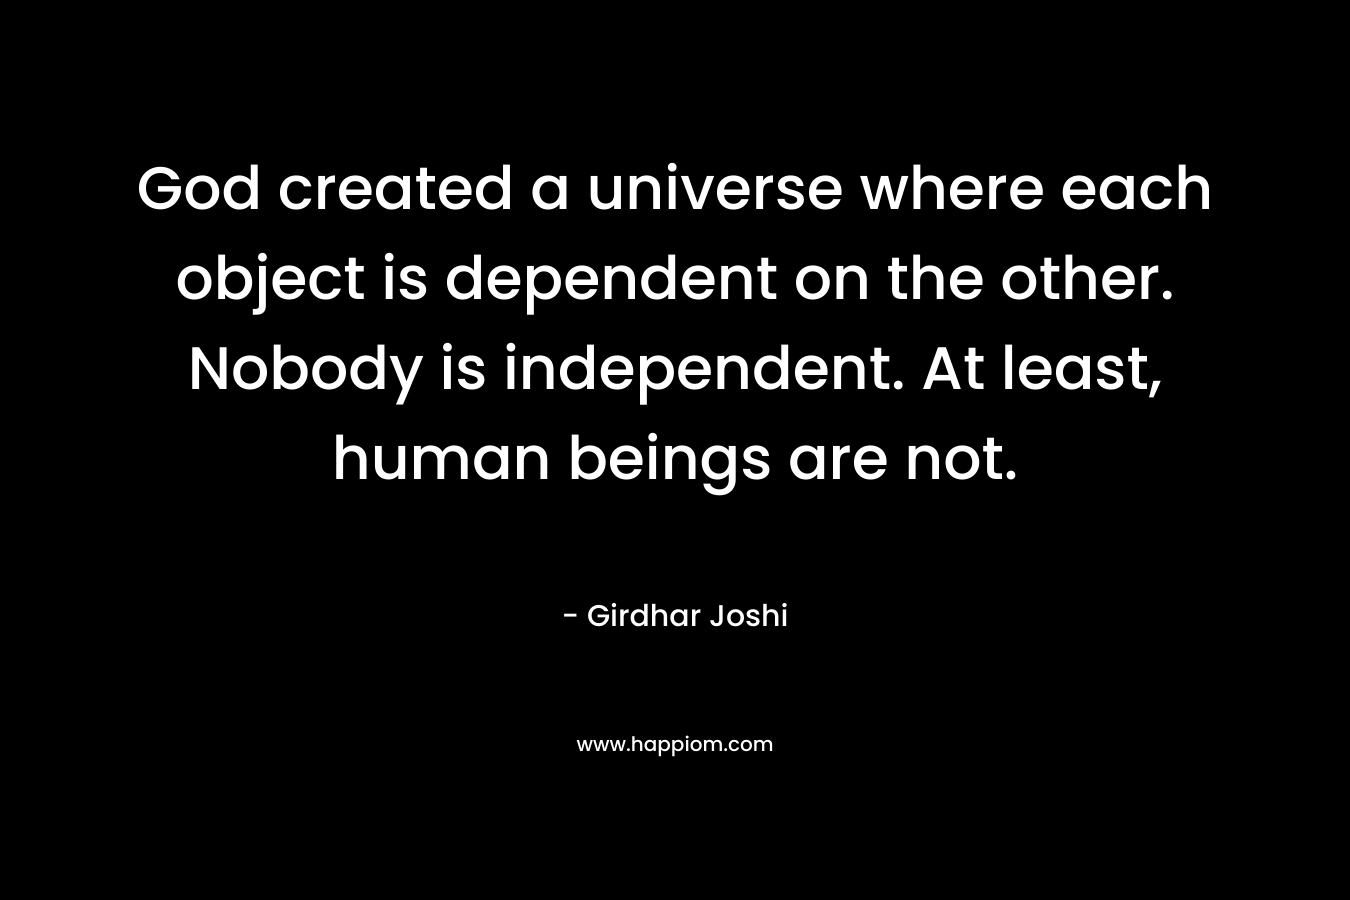 God created a universe where each object is dependent on the other. Nobody is independent. At least, human beings are not. – Girdhar Joshi